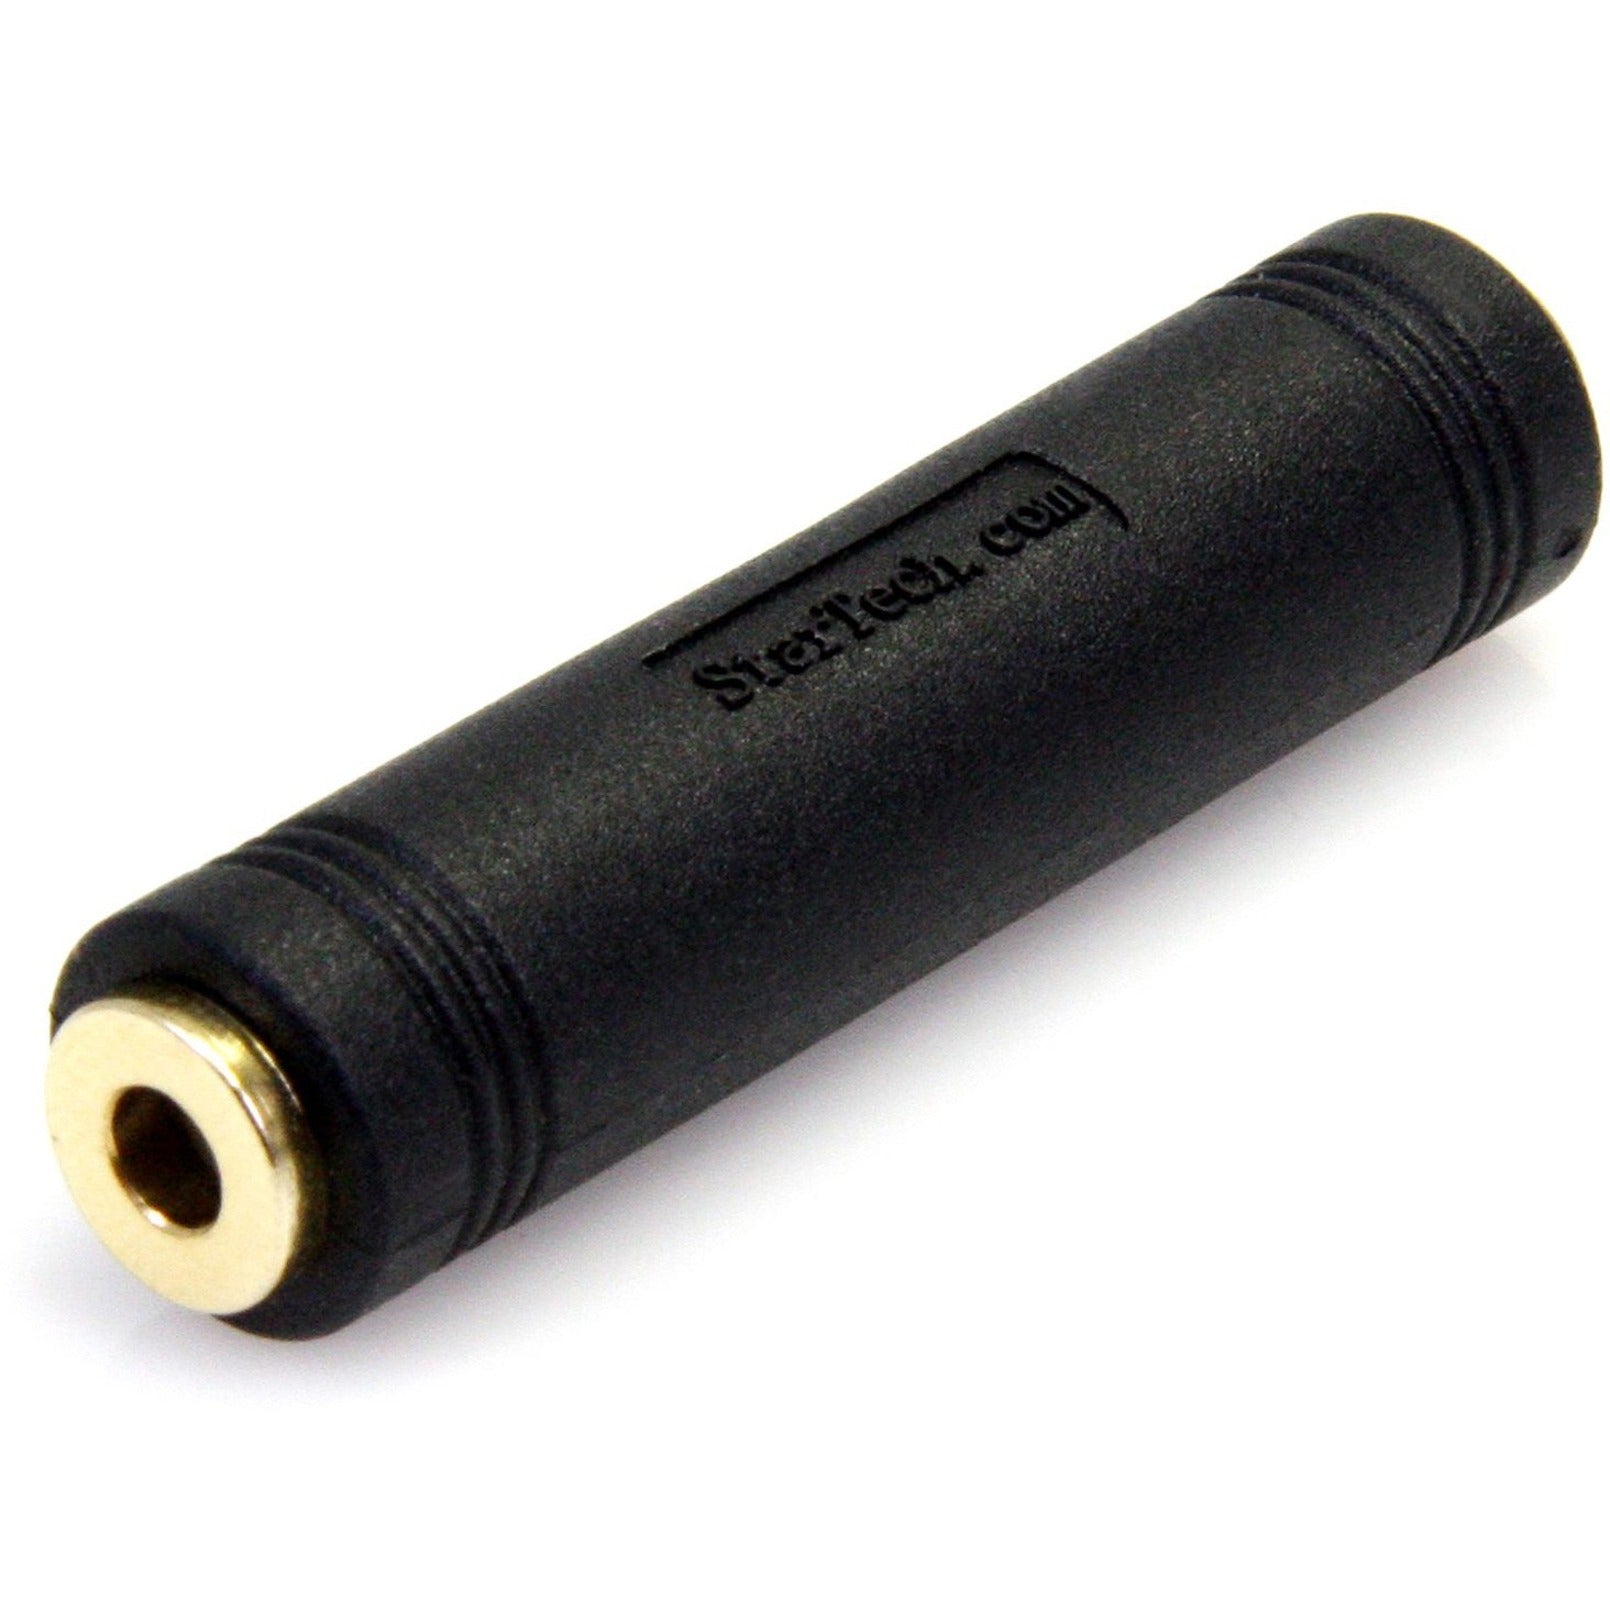 StarTech.com GCAUD3535FF 3.5 mm to 3.5 mm Audio Coupler - Female to Female, Gold Plated, Black